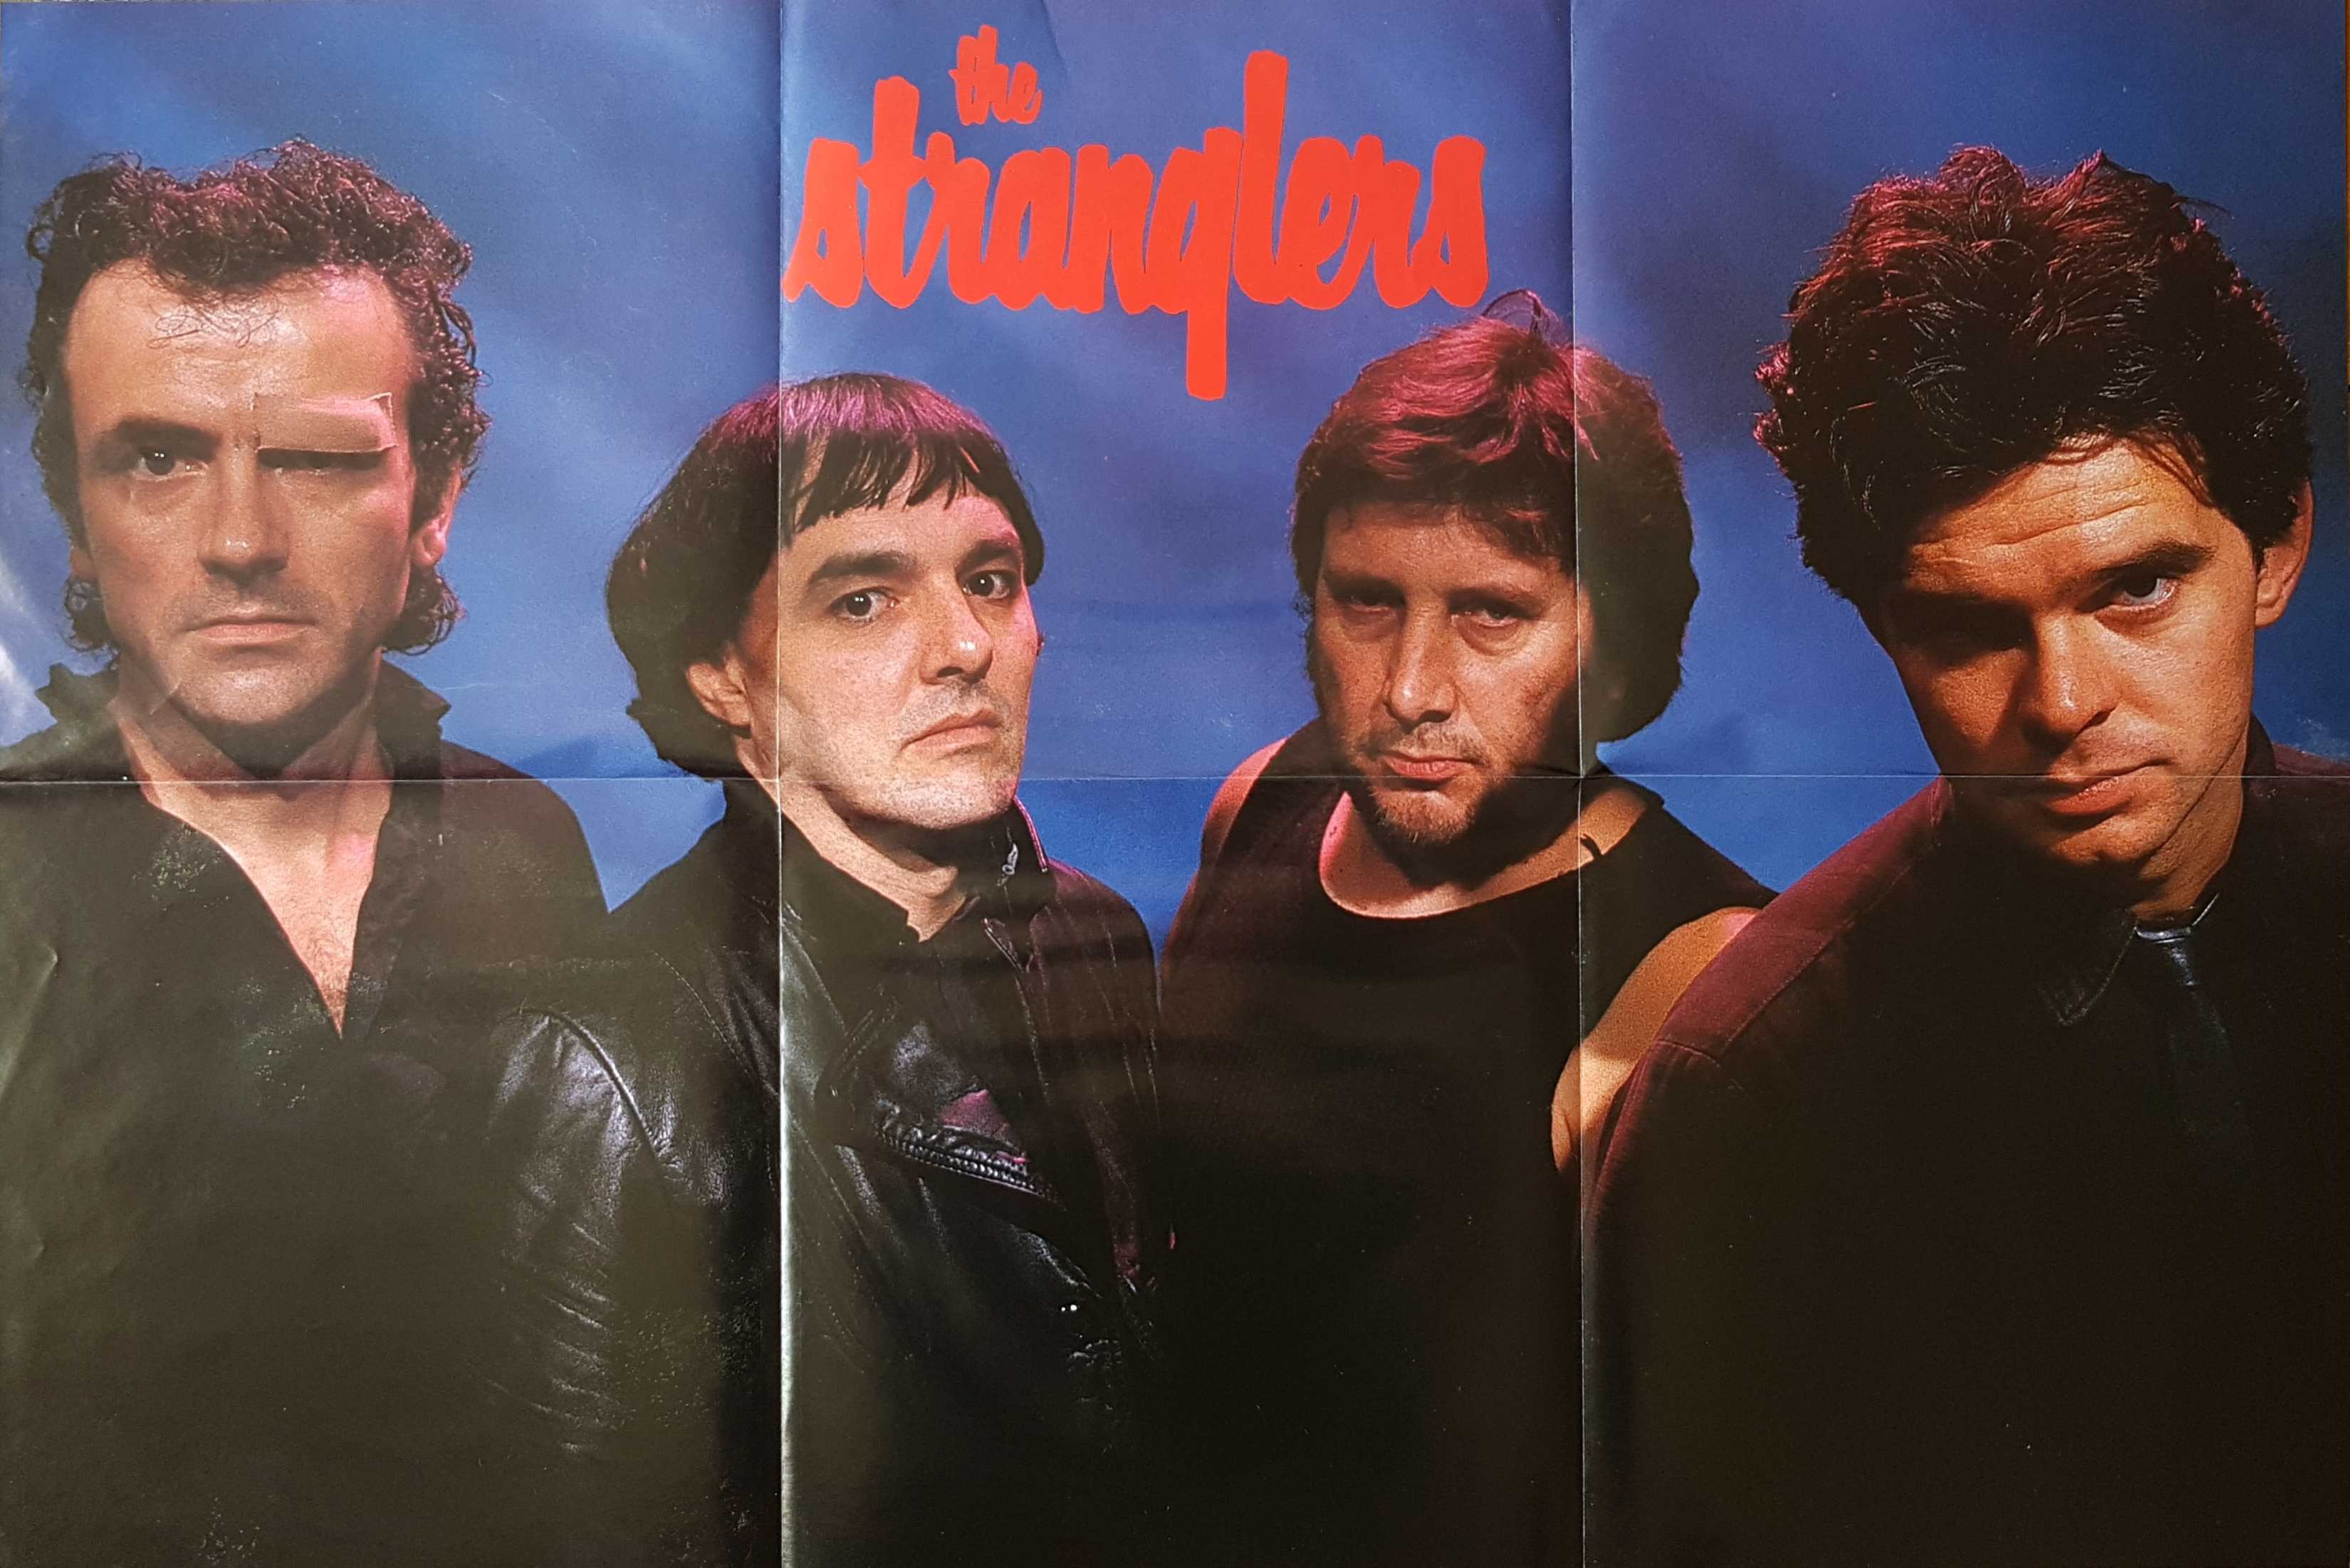 Picture of Let me down easy by artist The Stranglers  from The Stranglers posters